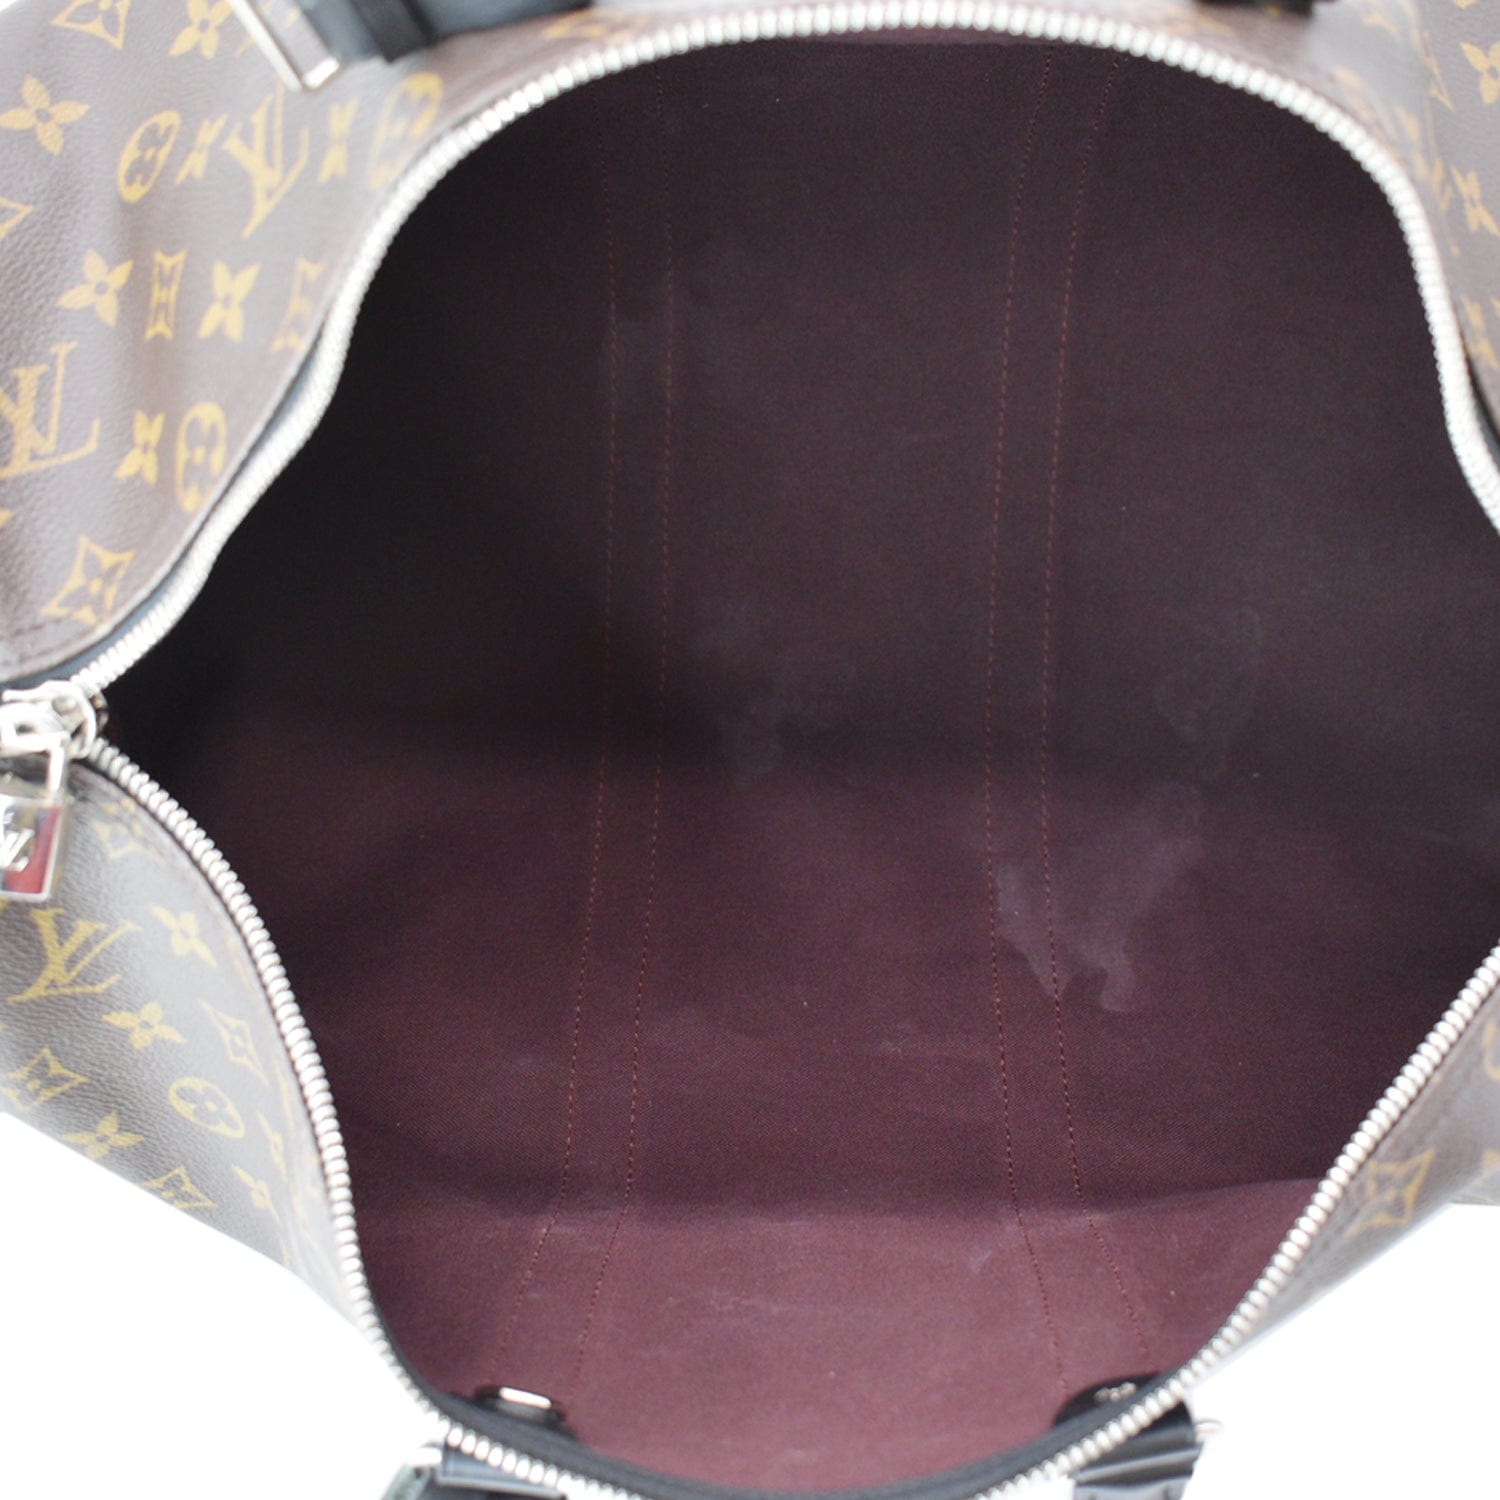 Louis Vuitton Monogram Keepall Bandouliere 45 - Brown Luggage and Travel,  Handbags - LOU748853